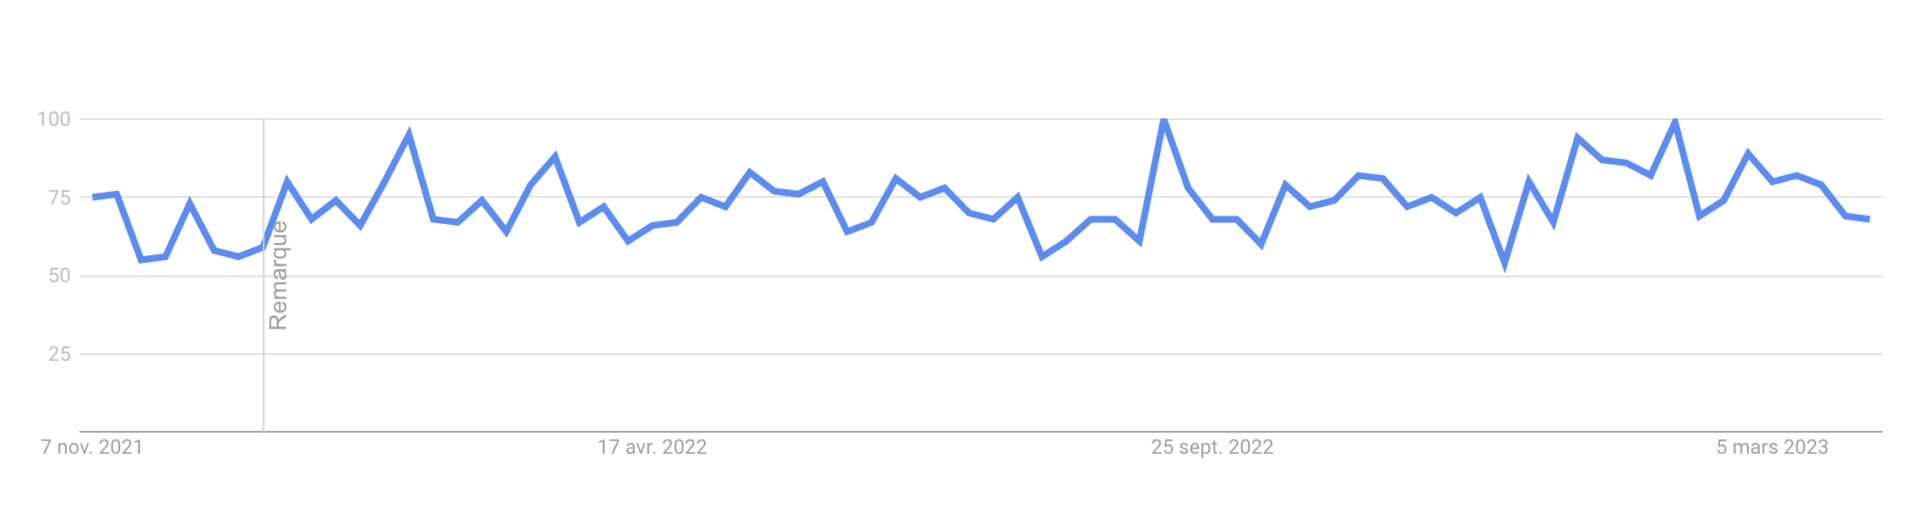 Google trend forever living products